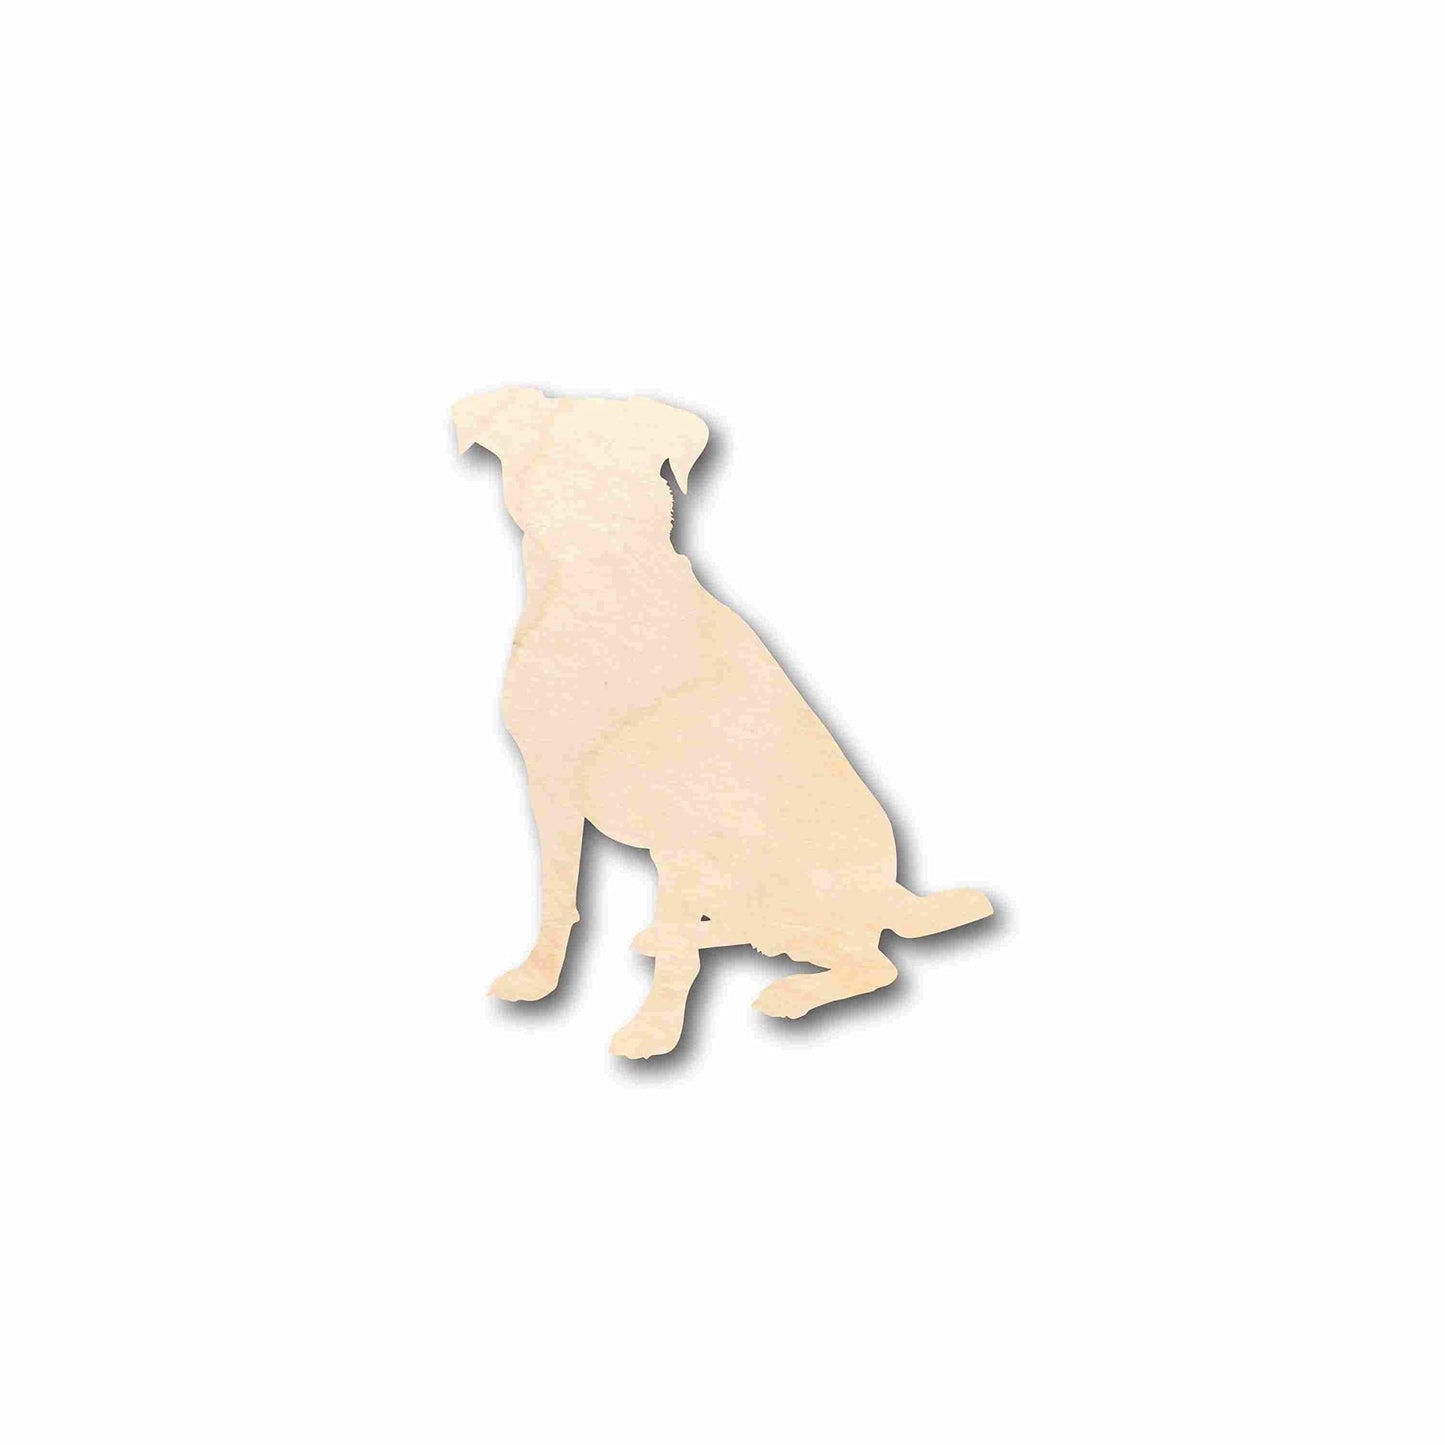 Unfinished Wood Dog Silhouette - Craft- up to 24" DIY 5" / 1/8"